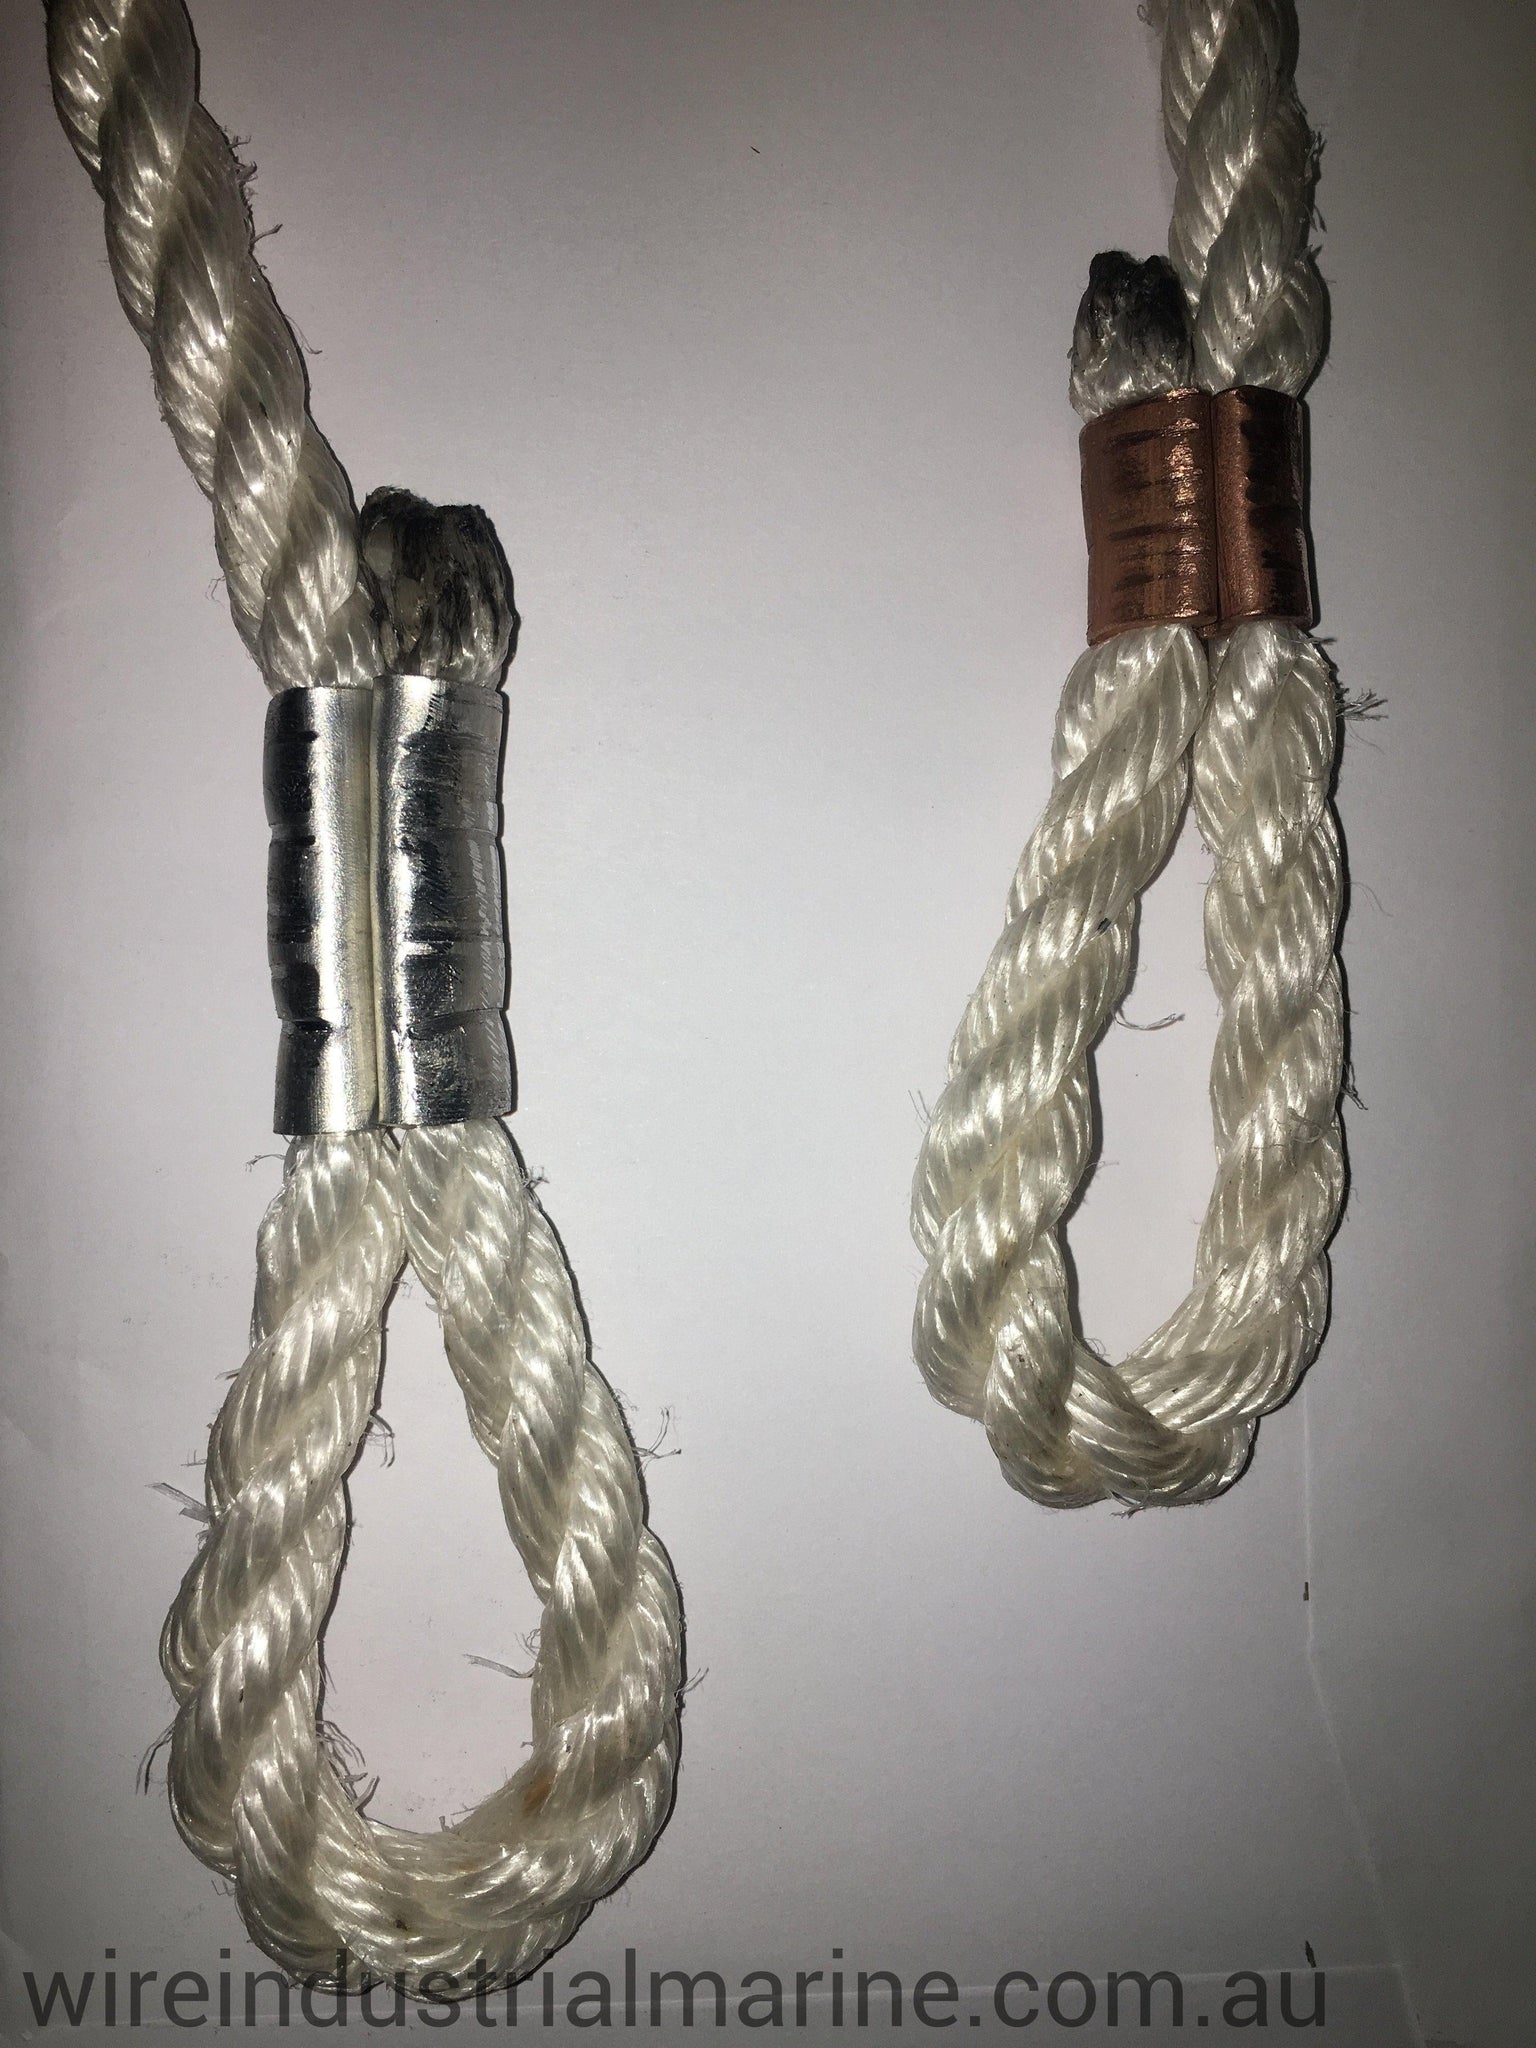 12mm Alloy swage for fibre rope-ARS-12.0-wireindustrialmarine